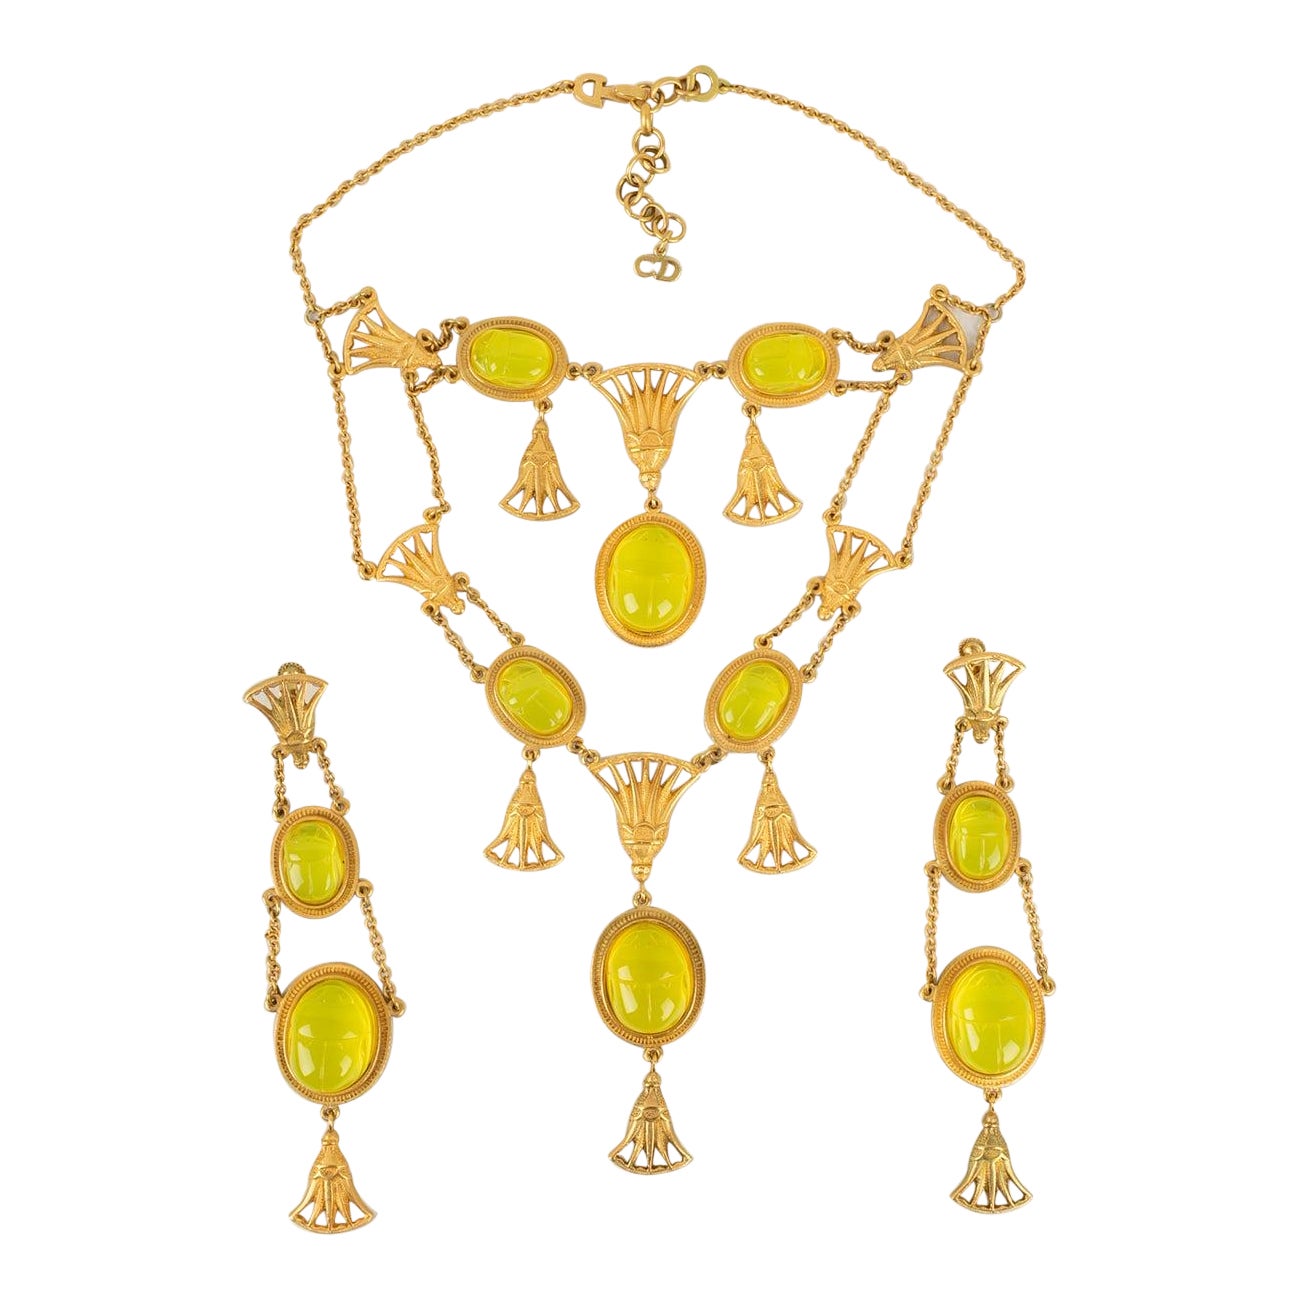 Christian Dior Necklace/Egyptian Jewelry, 2004